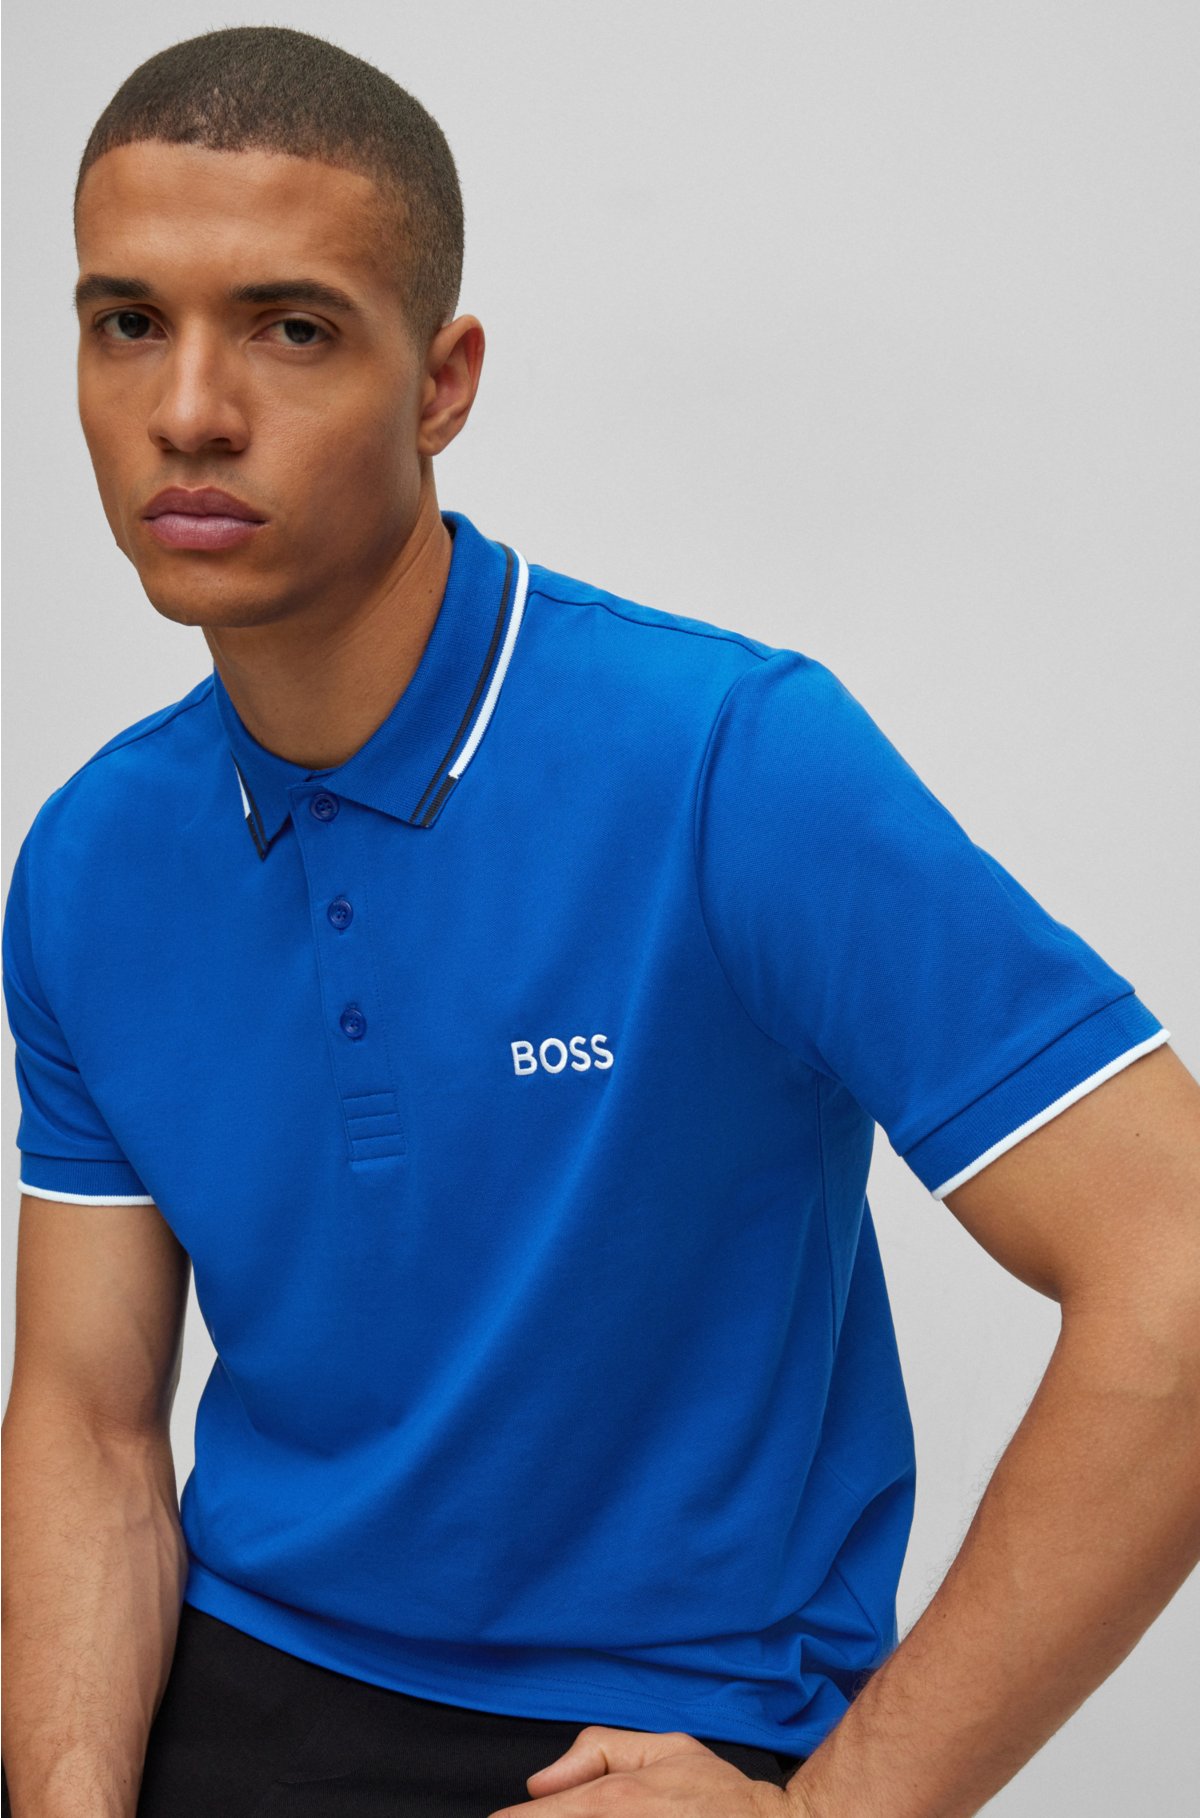 BOSS - contrast with shirt Cotton-blend polo details